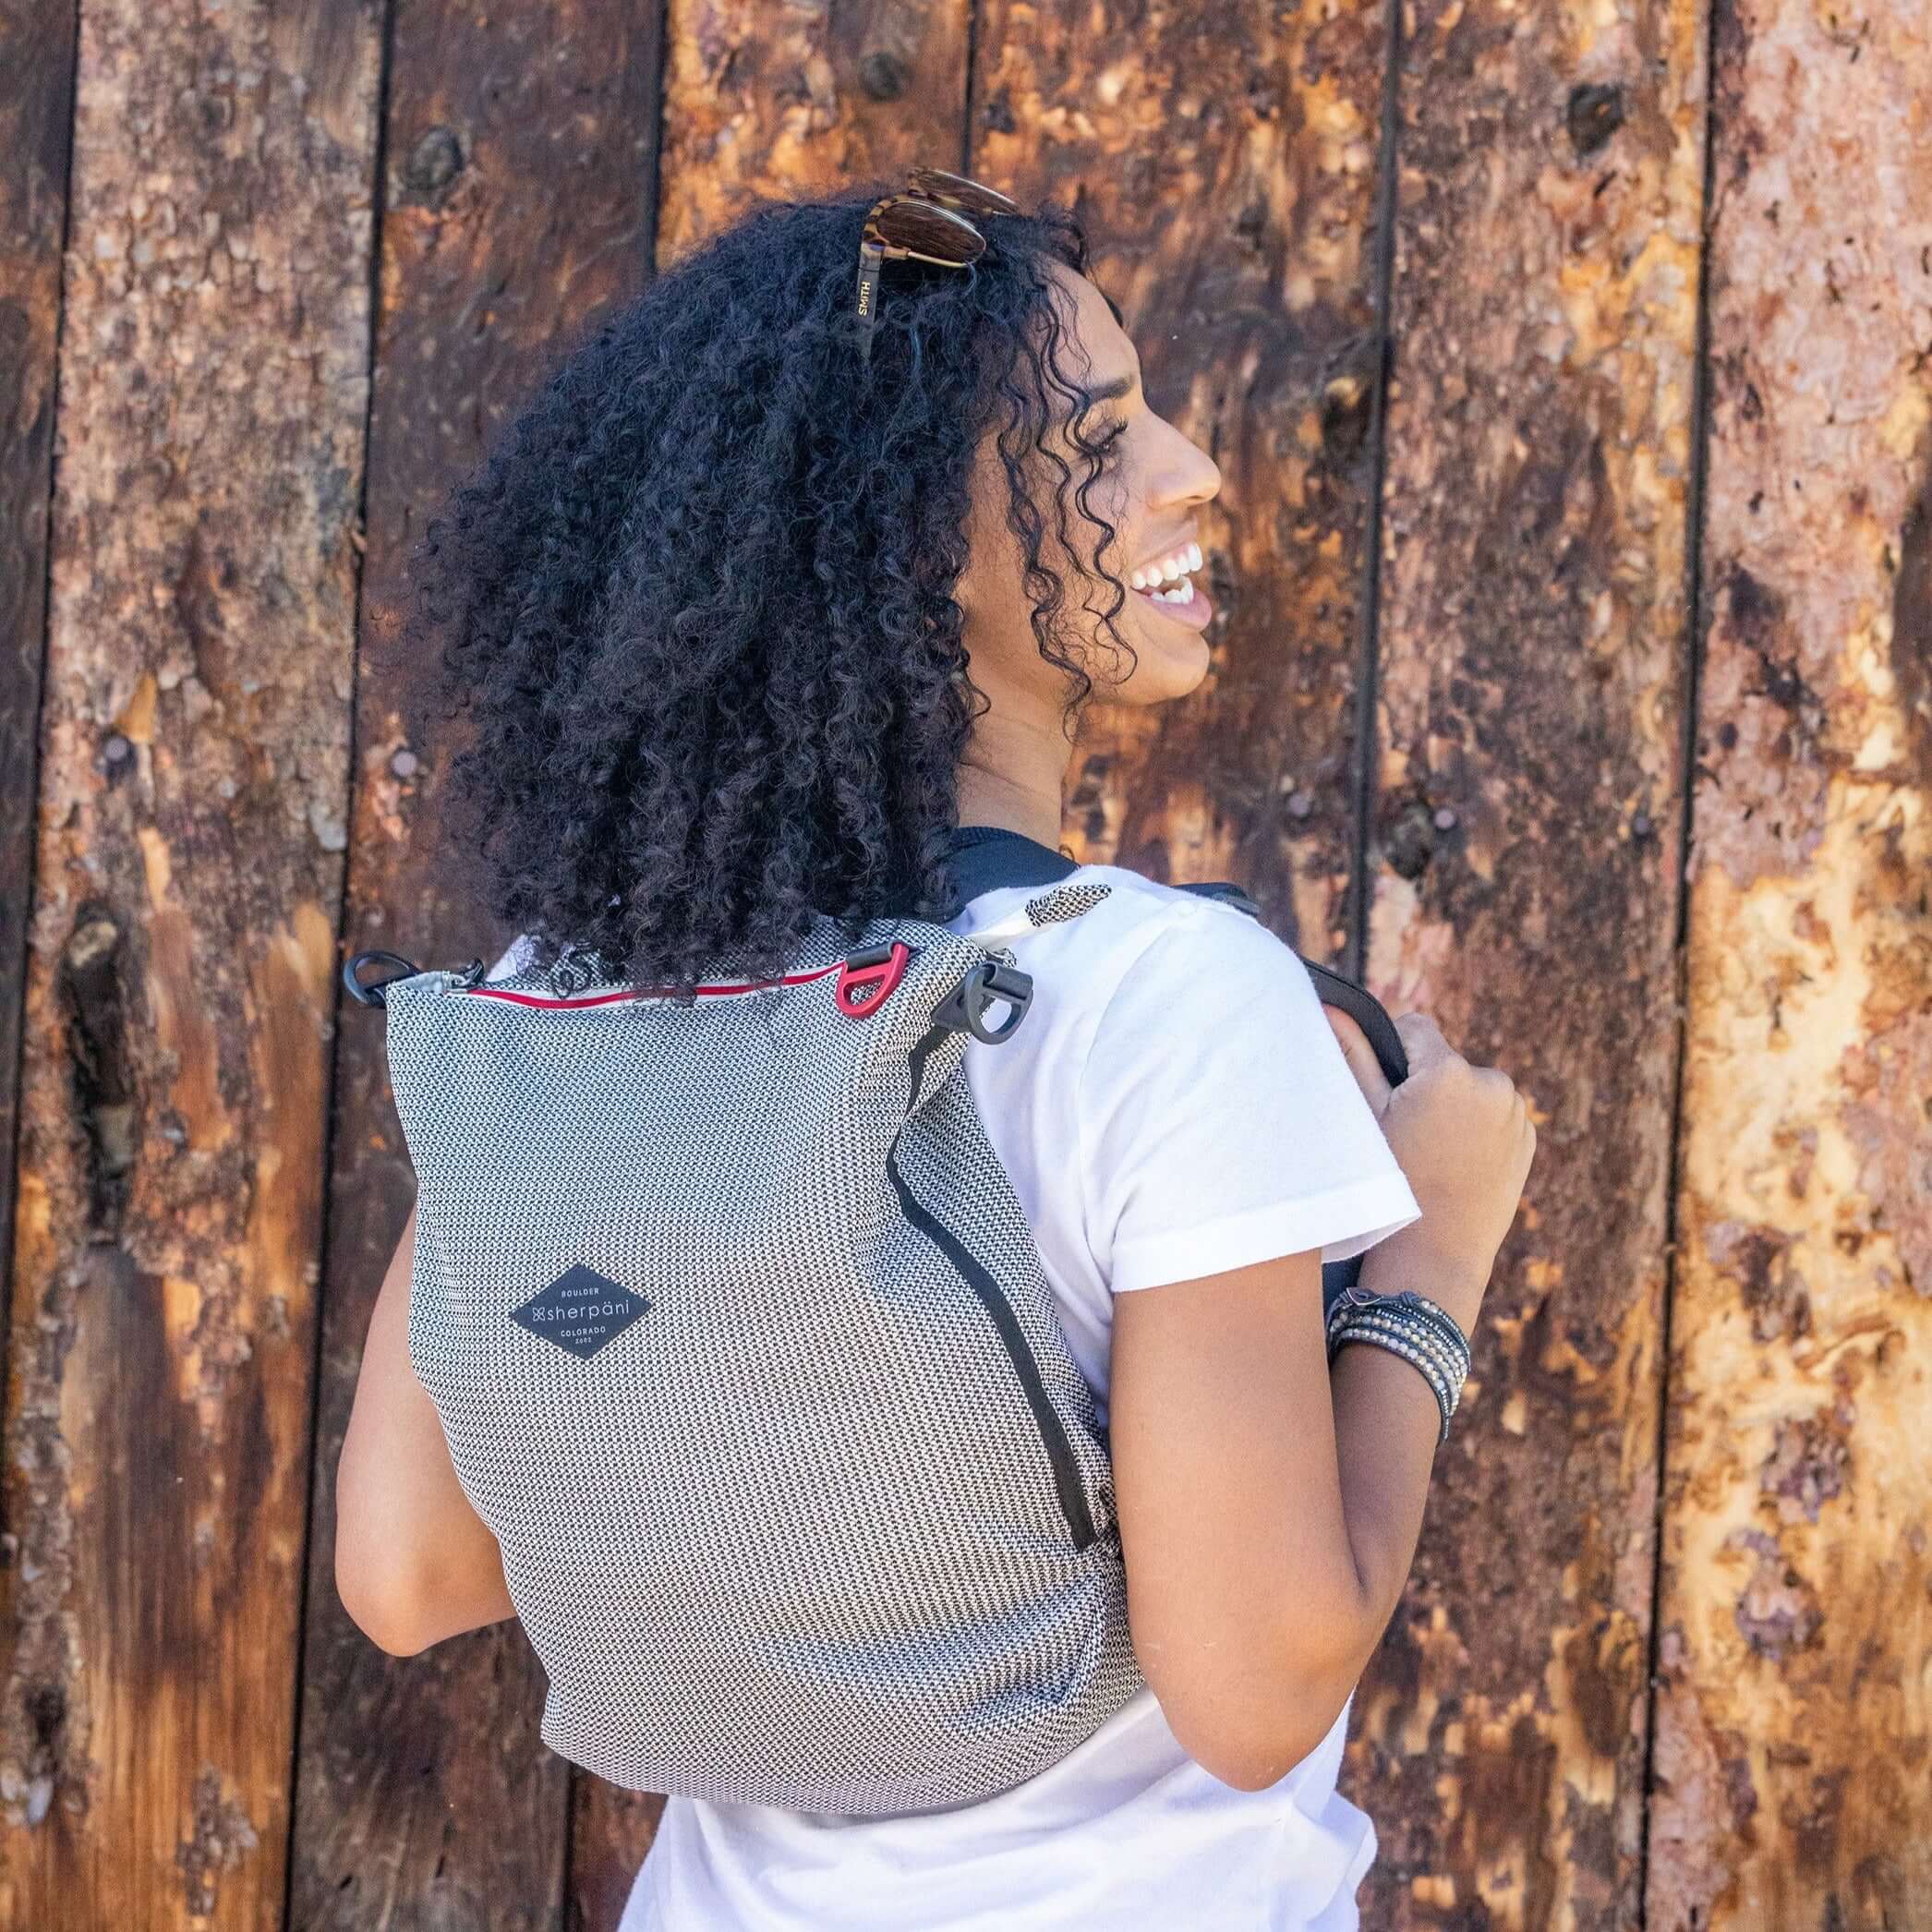 A curly haired woman stands outside in front of a wooden wall. She is facing away from the camera and smiling over her right shoulder. She is wearing a white tee shirt. She carries Sherpani mesh convertible bag, the Delanie, as a backpack.